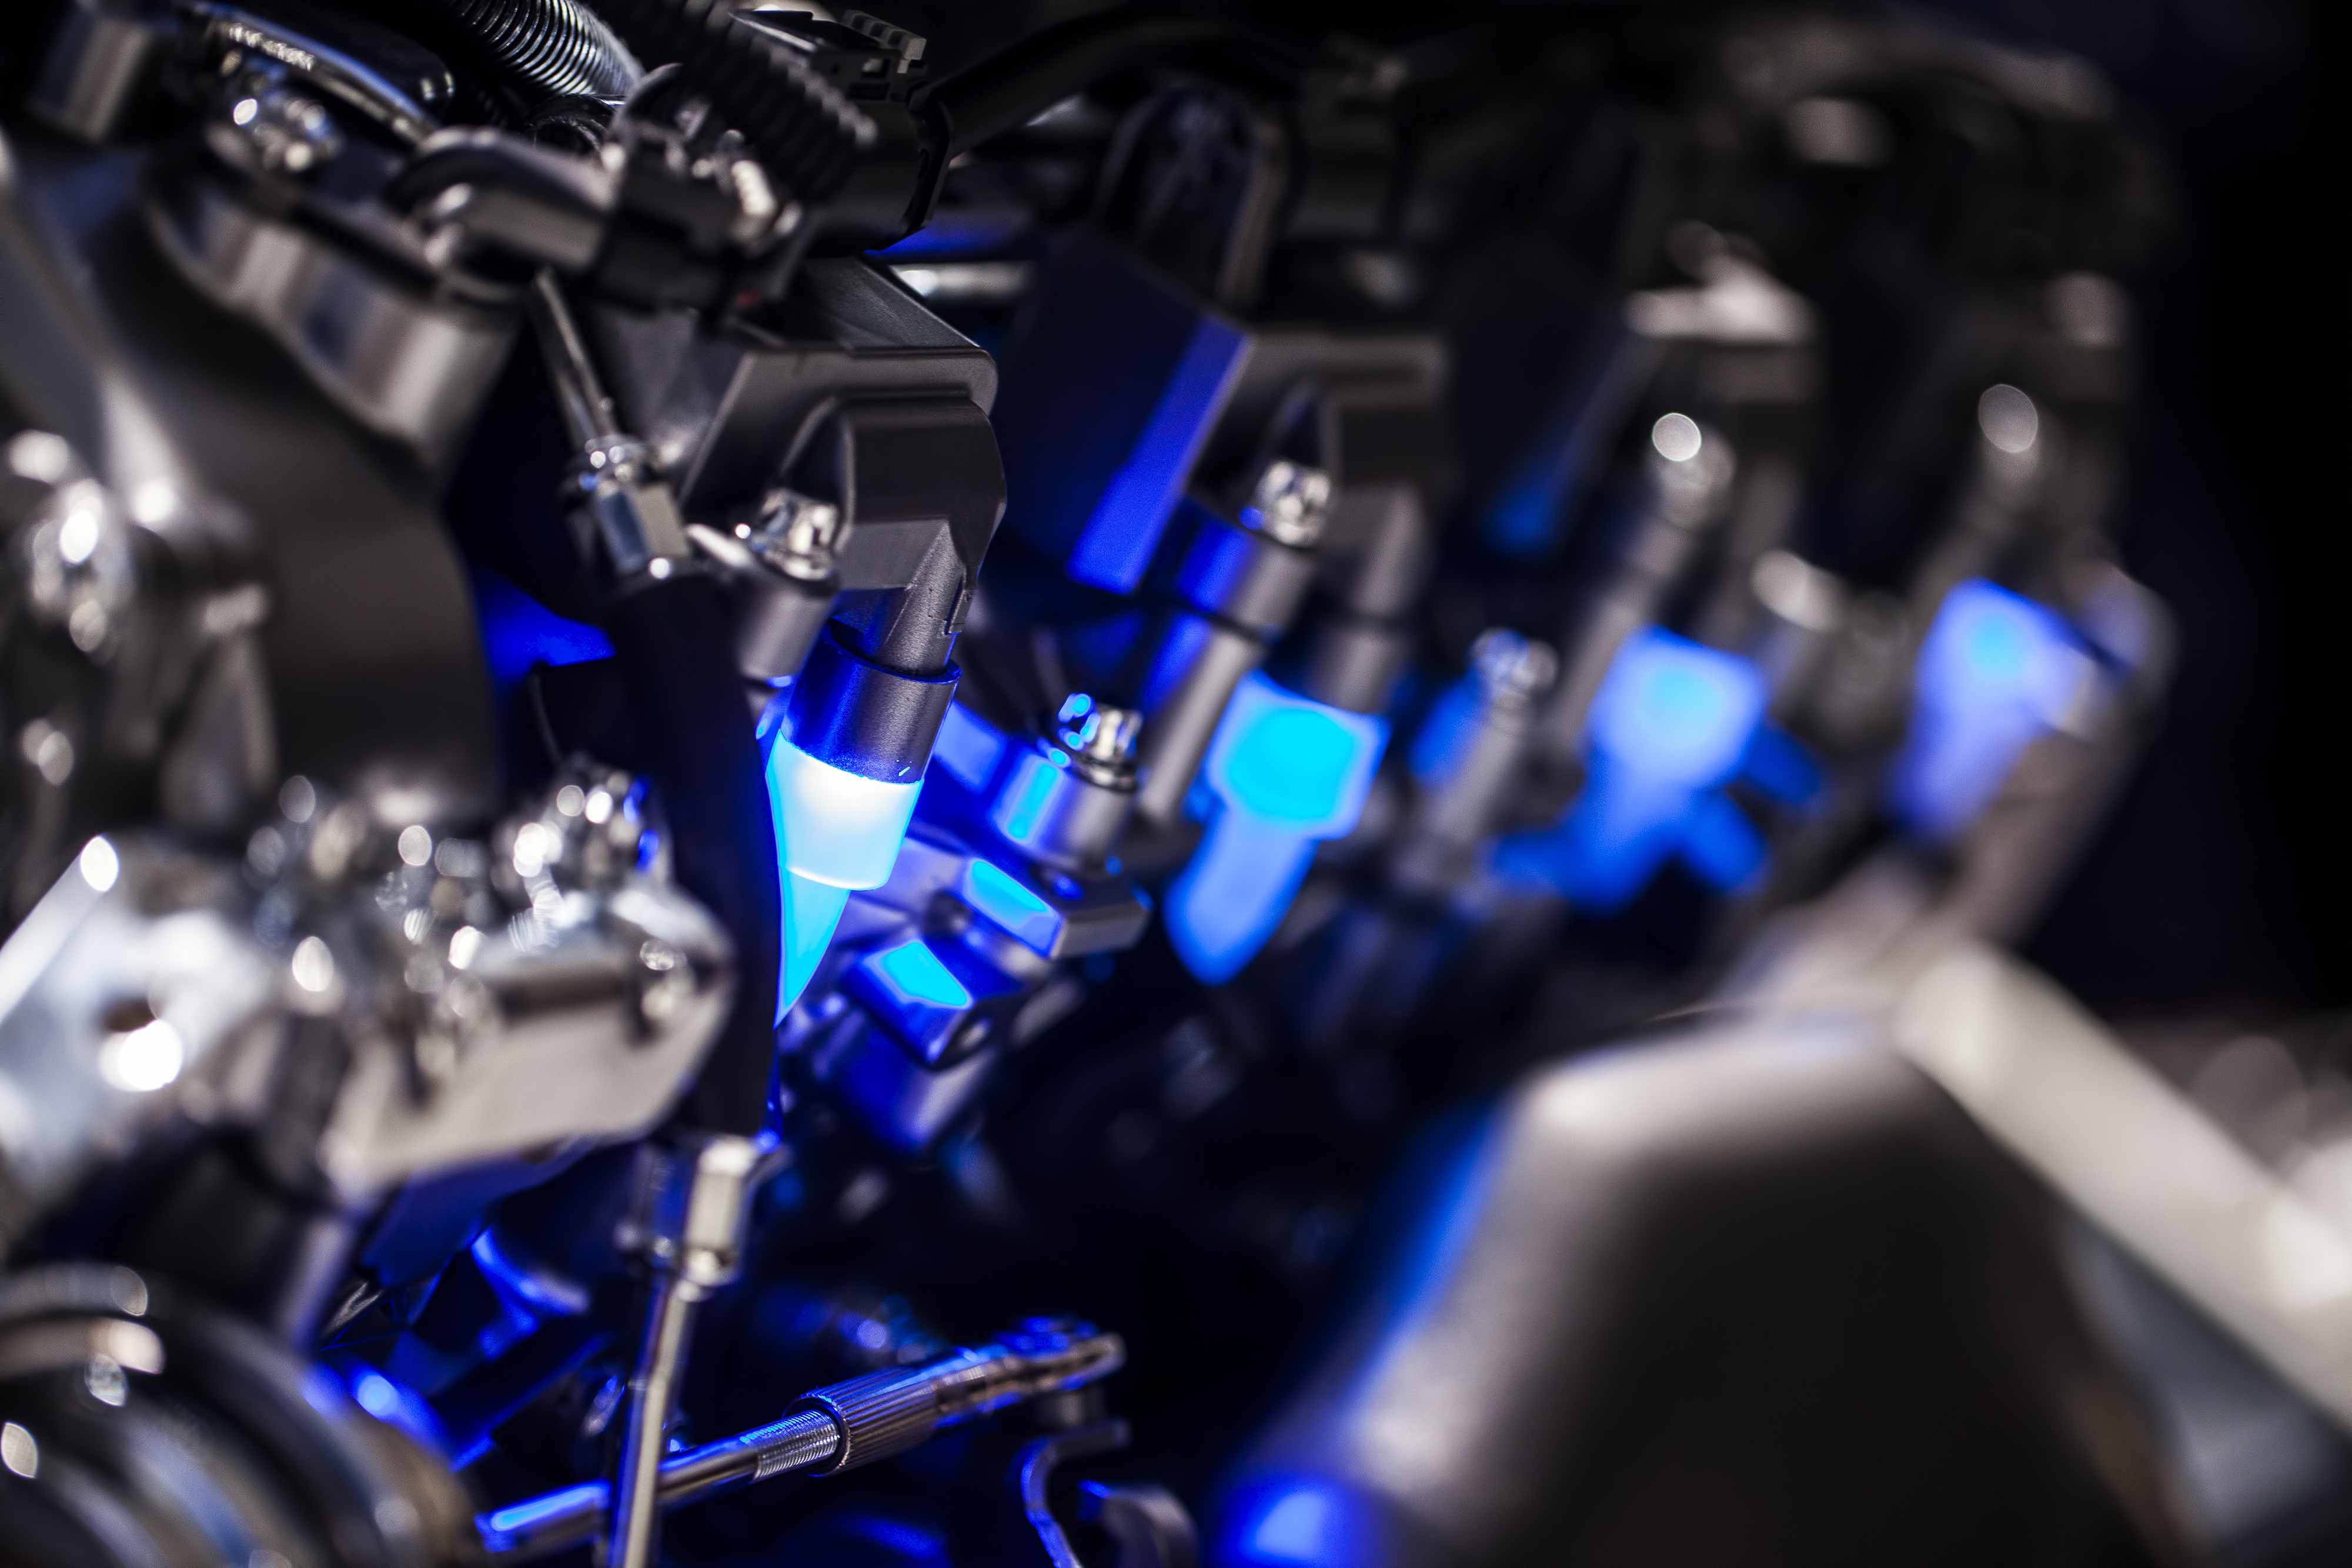 The Impact of Fuel Quality on the Performance of Fuel Injectors in 5.9L and 6.7L Diesel Engines